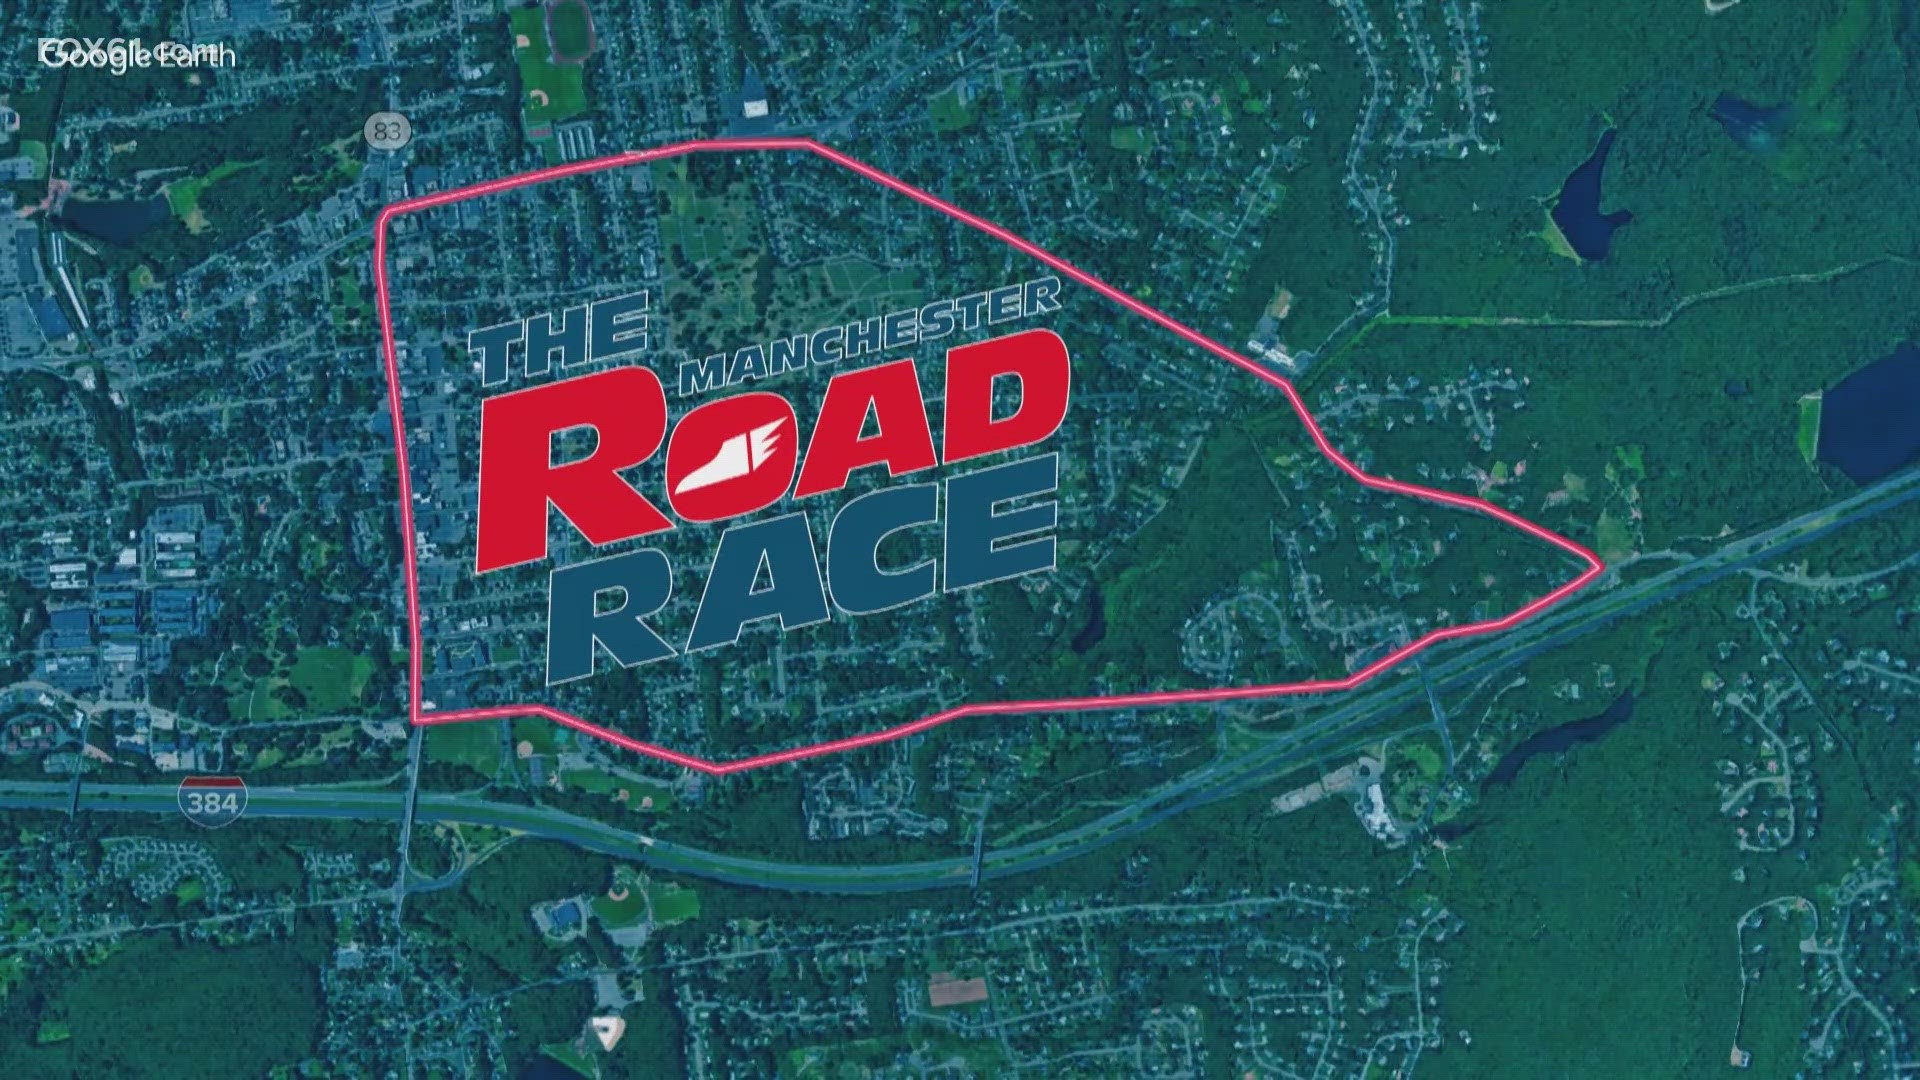 This is the route runners will take for this year's Manchester Road Race.